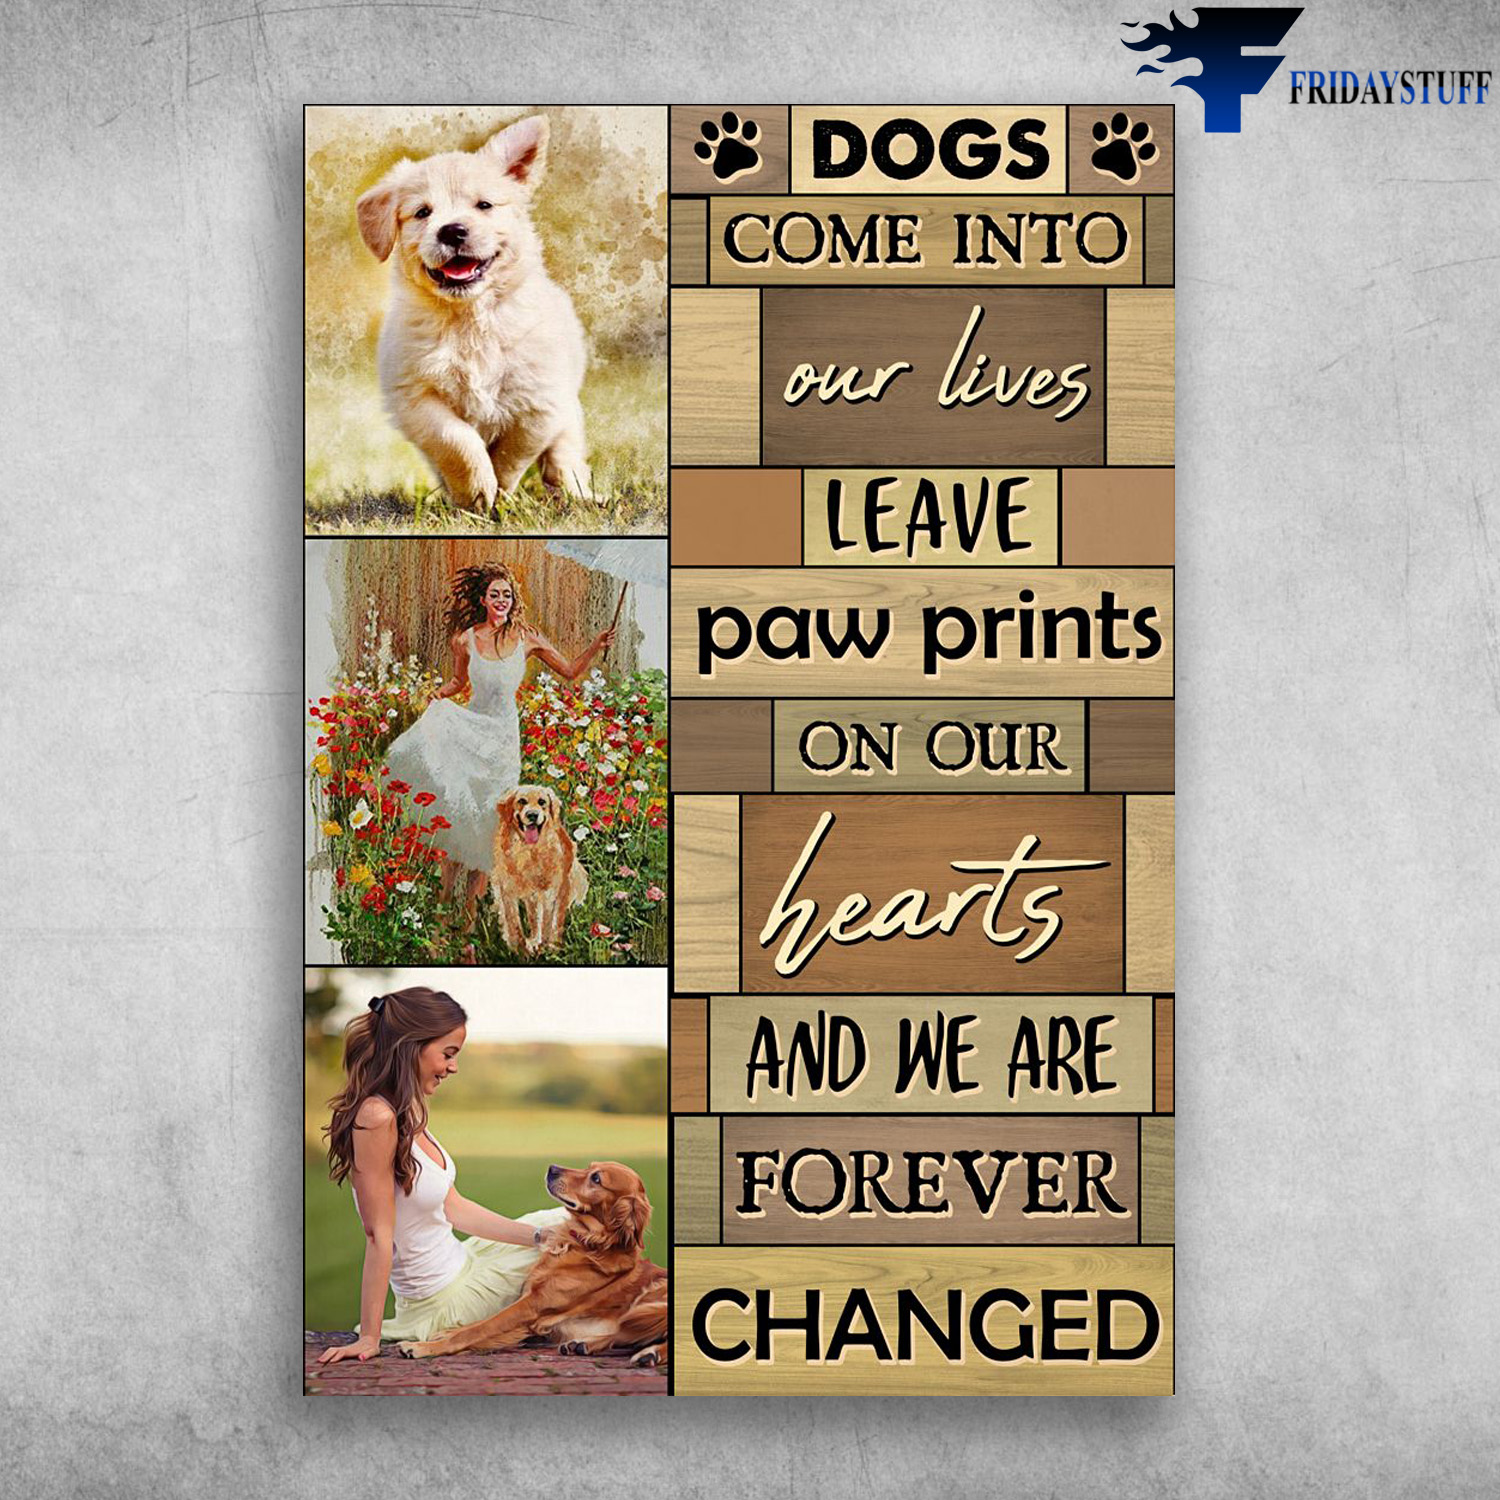 Golden Retriever And The Girl - Dogs Come Into Our Lives, Leave Paw Prints On Our Hearts, And We Are Forever Changed